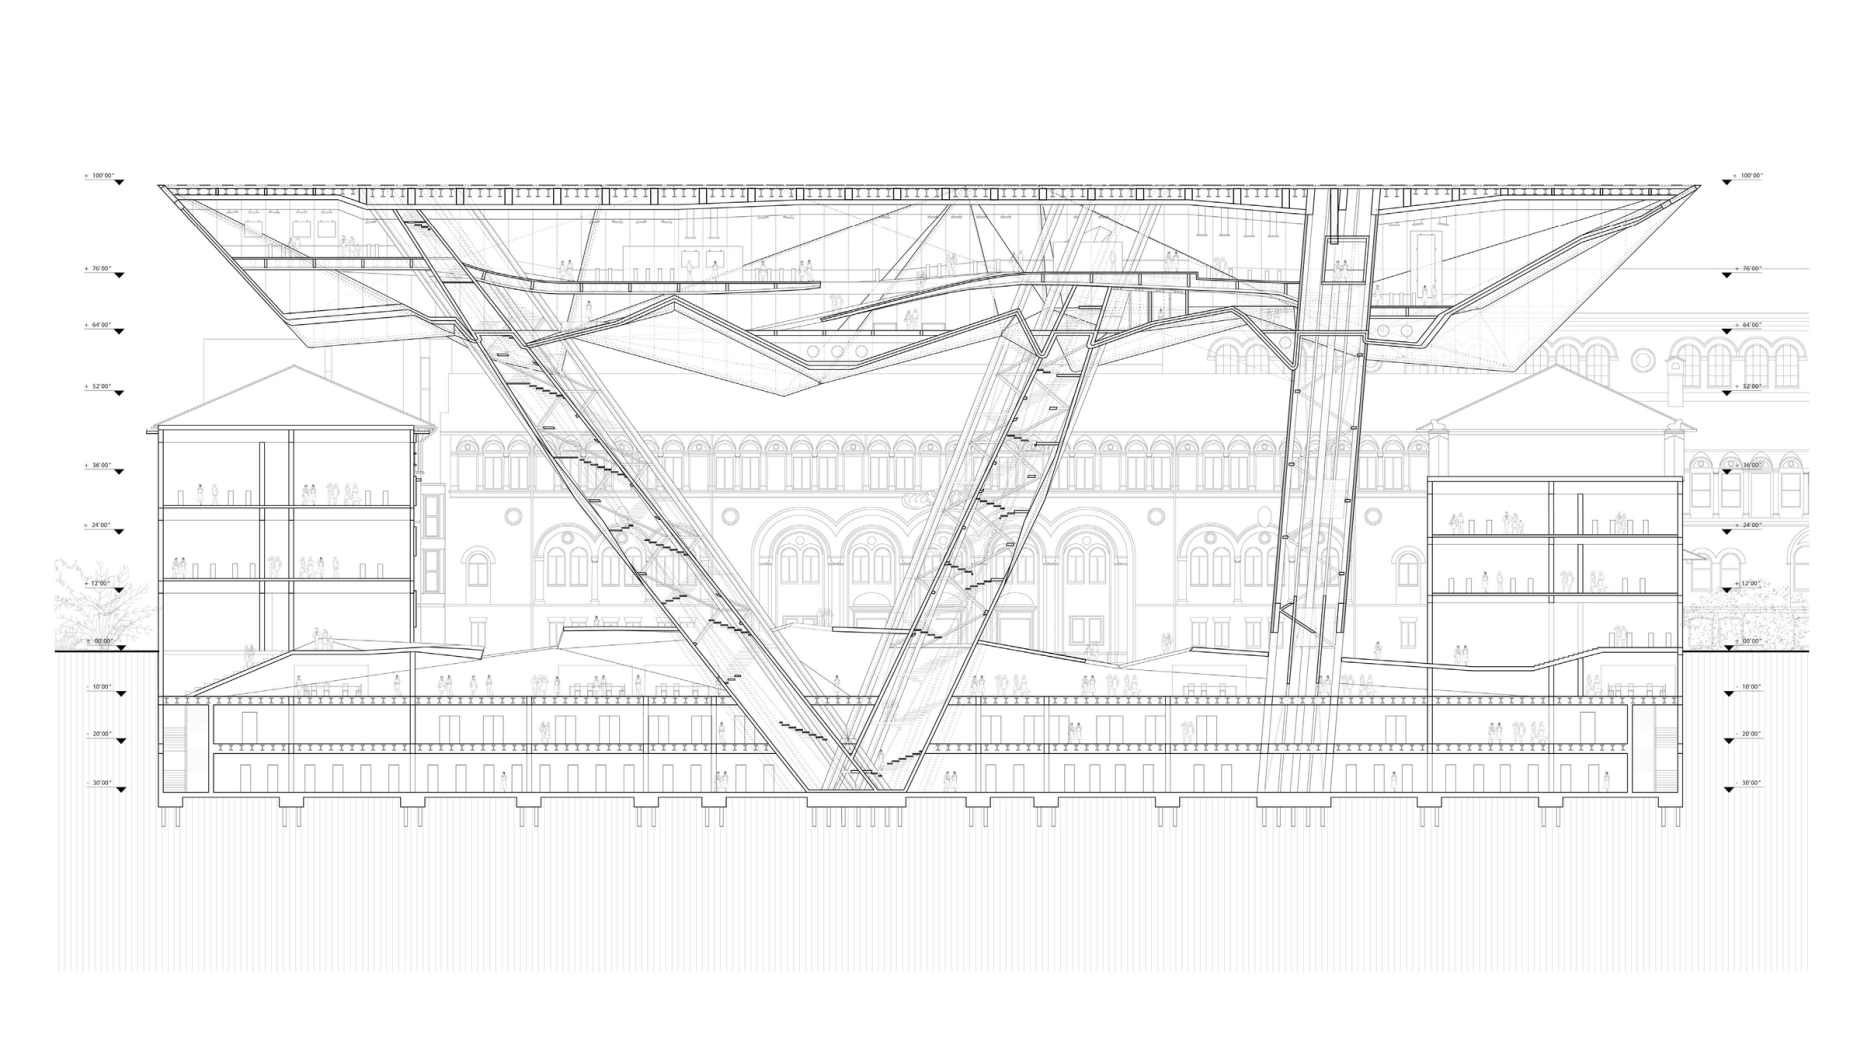 Drawing of a building structured as a canopy standing over an older building